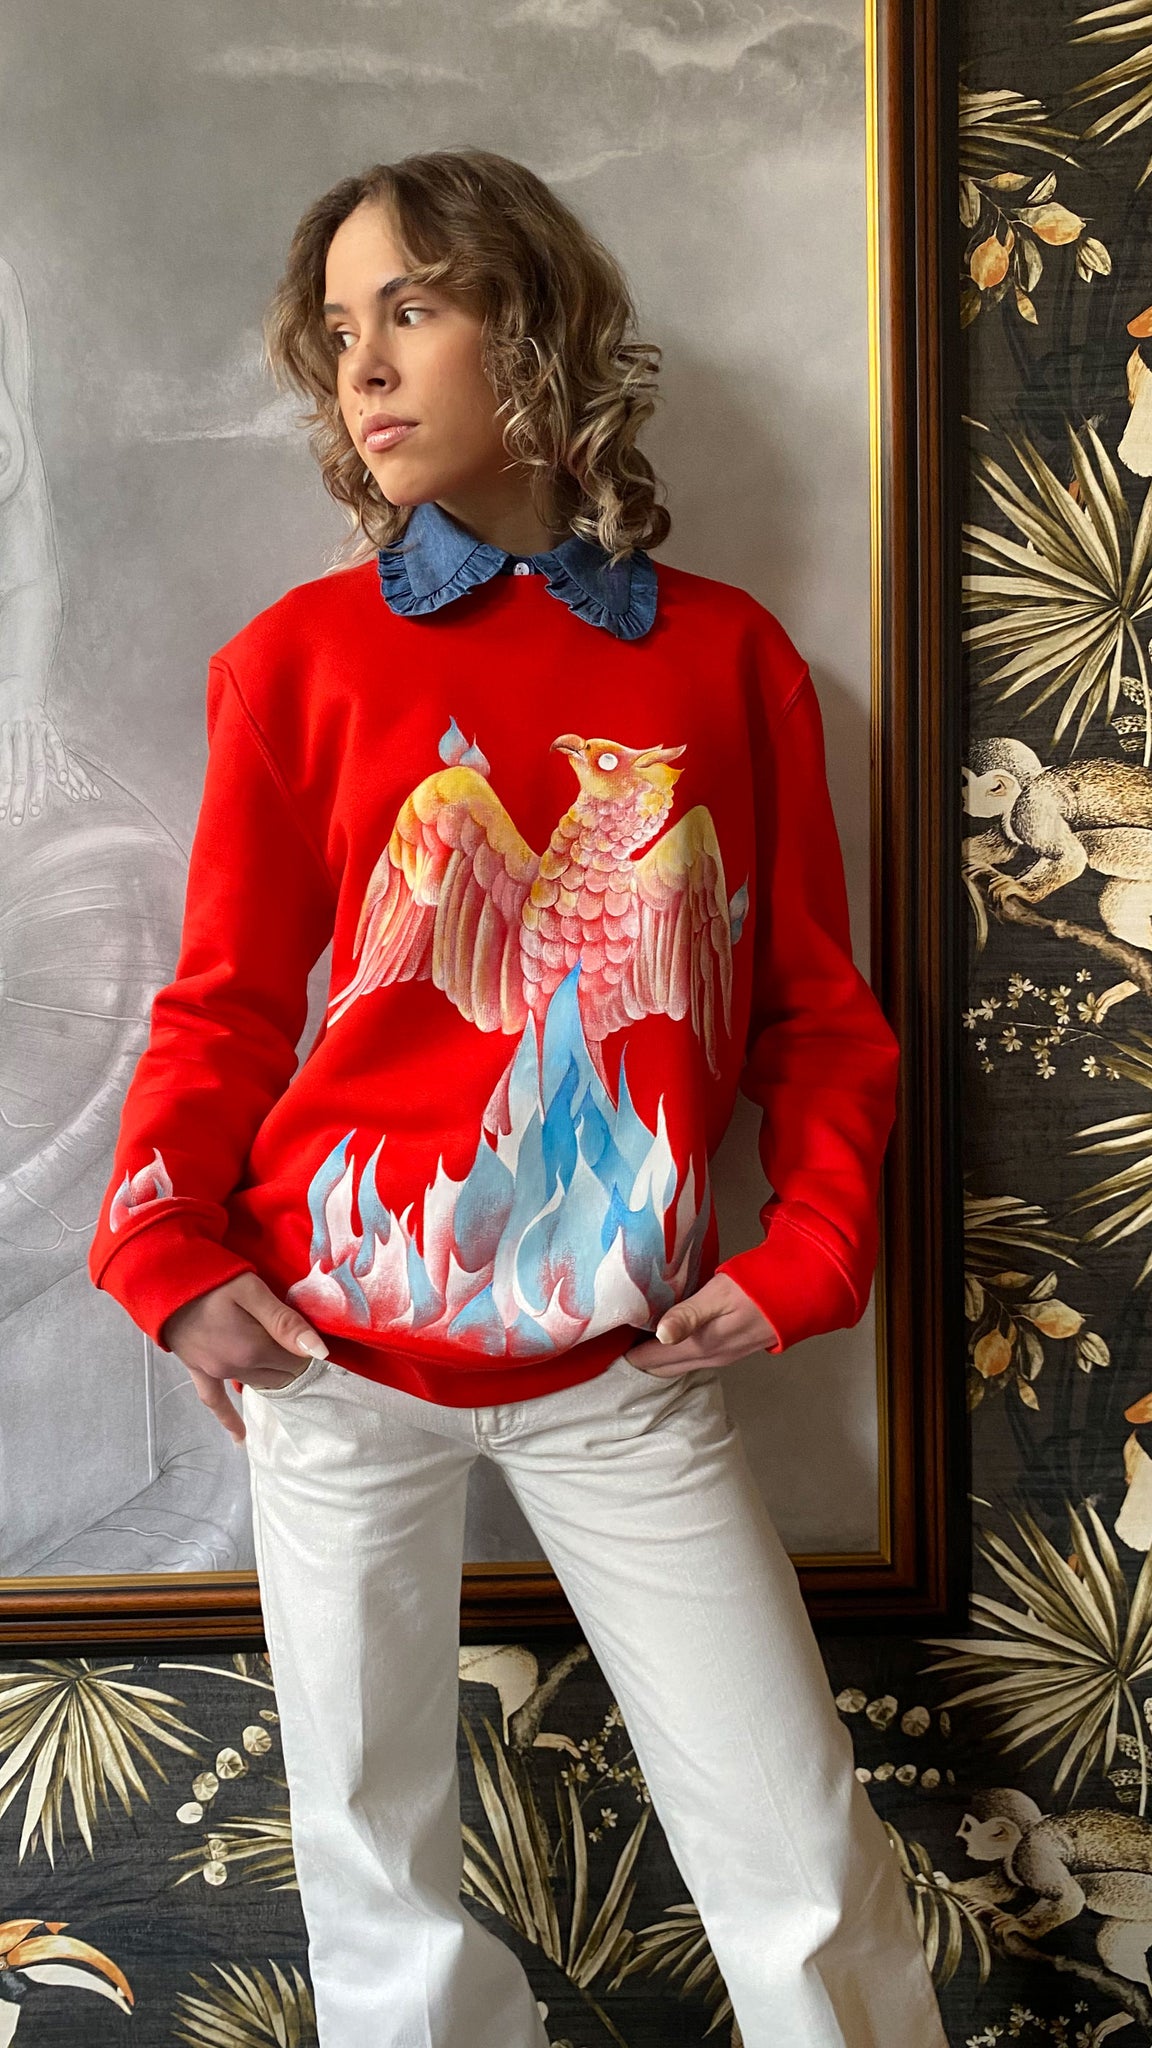 Hand-painted Red Vegan Sweatshirt with an illustration of The Phoenix, painted with non-toxic paints by Atelier Astrid & Antoinette